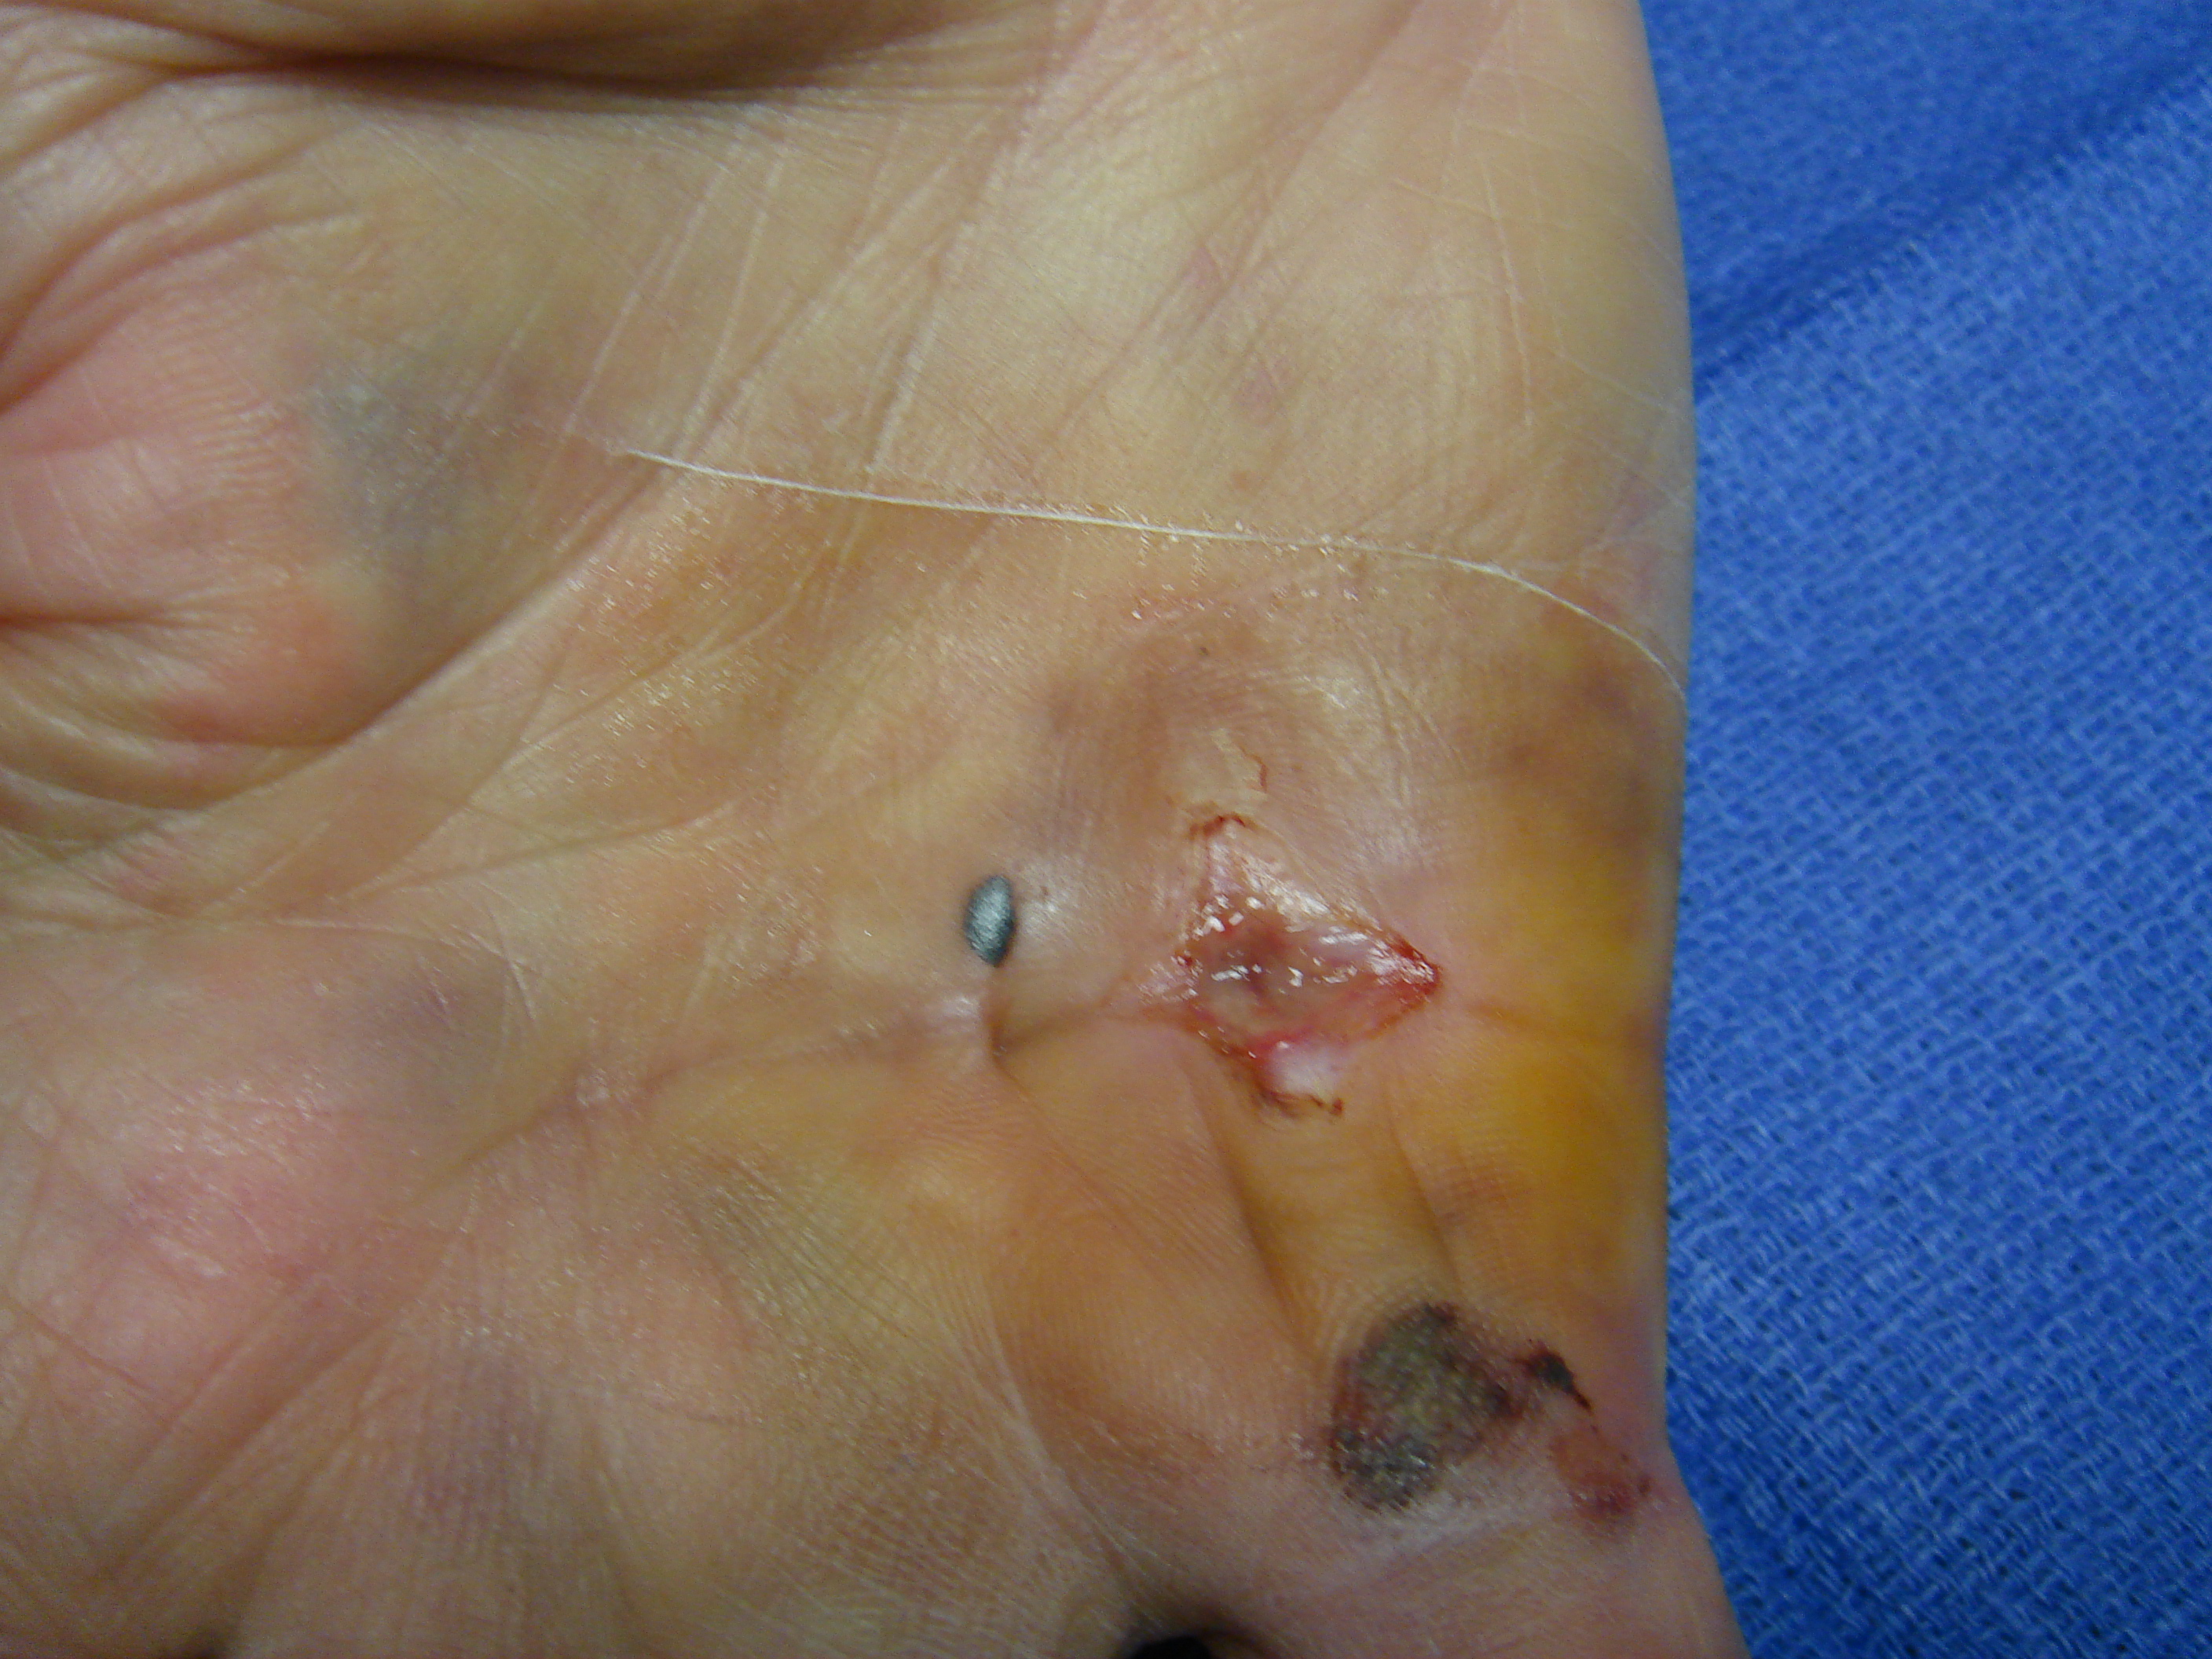 Figure 2c: These photographs illustrate the patient’s hand 7 days post-enzyme injection. The custom thermoplastic night splint is shown; the palmar skin tear and MP crease bruise are healing.